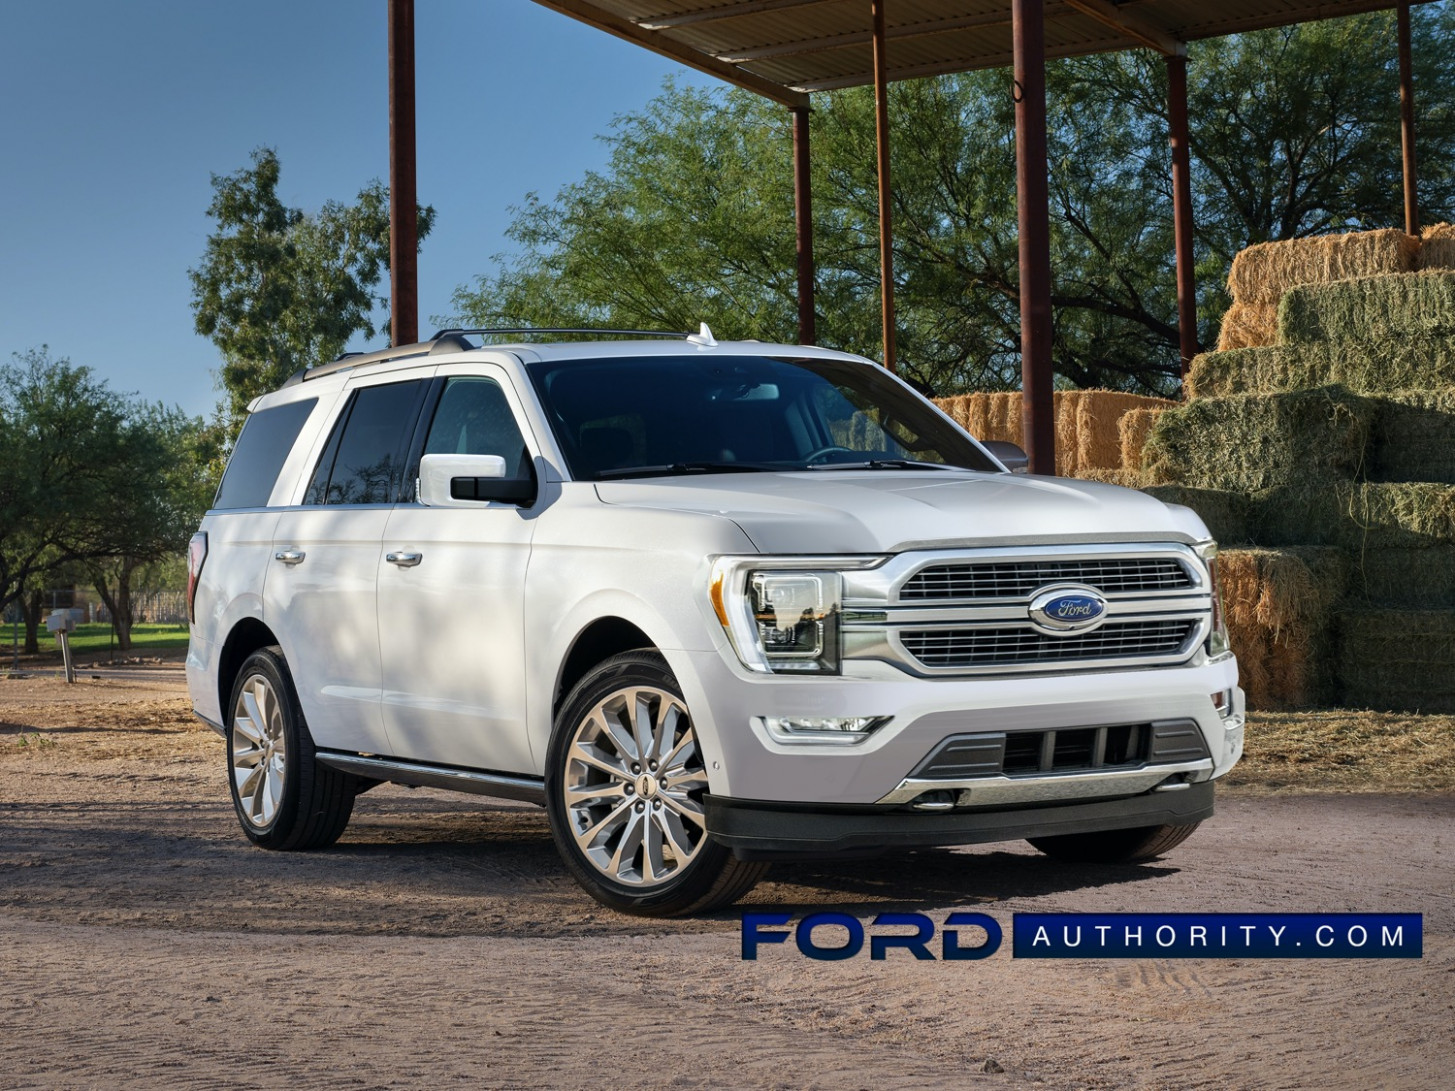 New Model and Performance 2023 ford expedition images